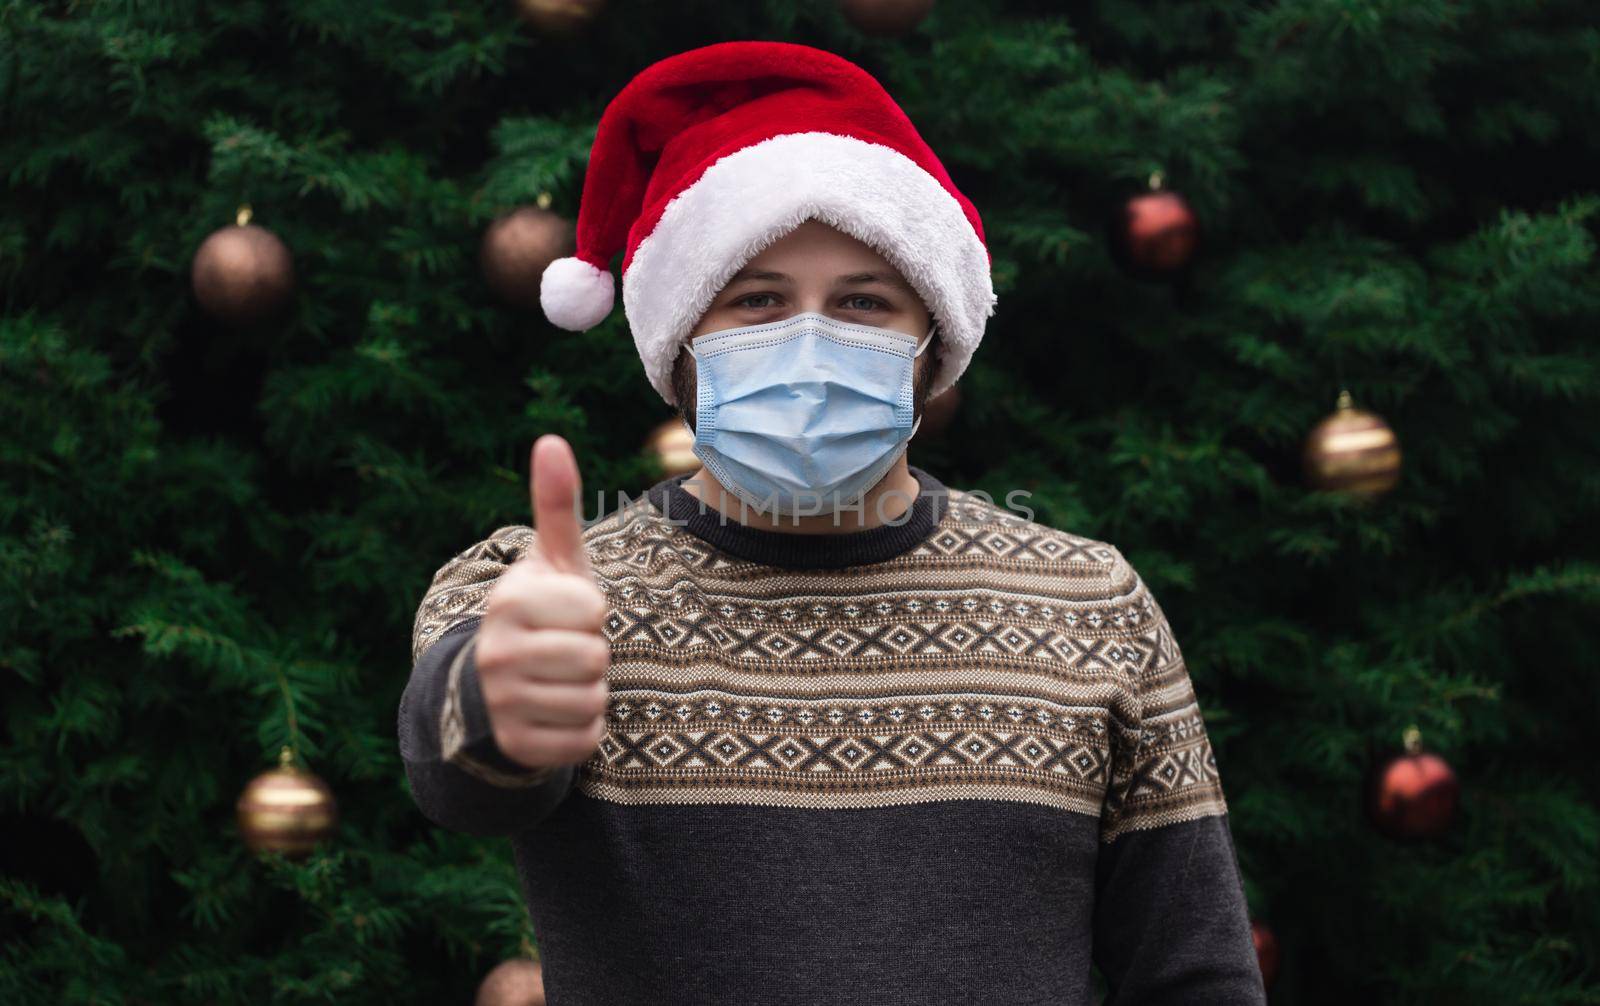 Christmas thumbs up like sign. Close up Portrait of man wearing a santa claus hat, xmas sweater and medical mask with emotion. Against the background of a Christmas tree. Coronavirus pandemic